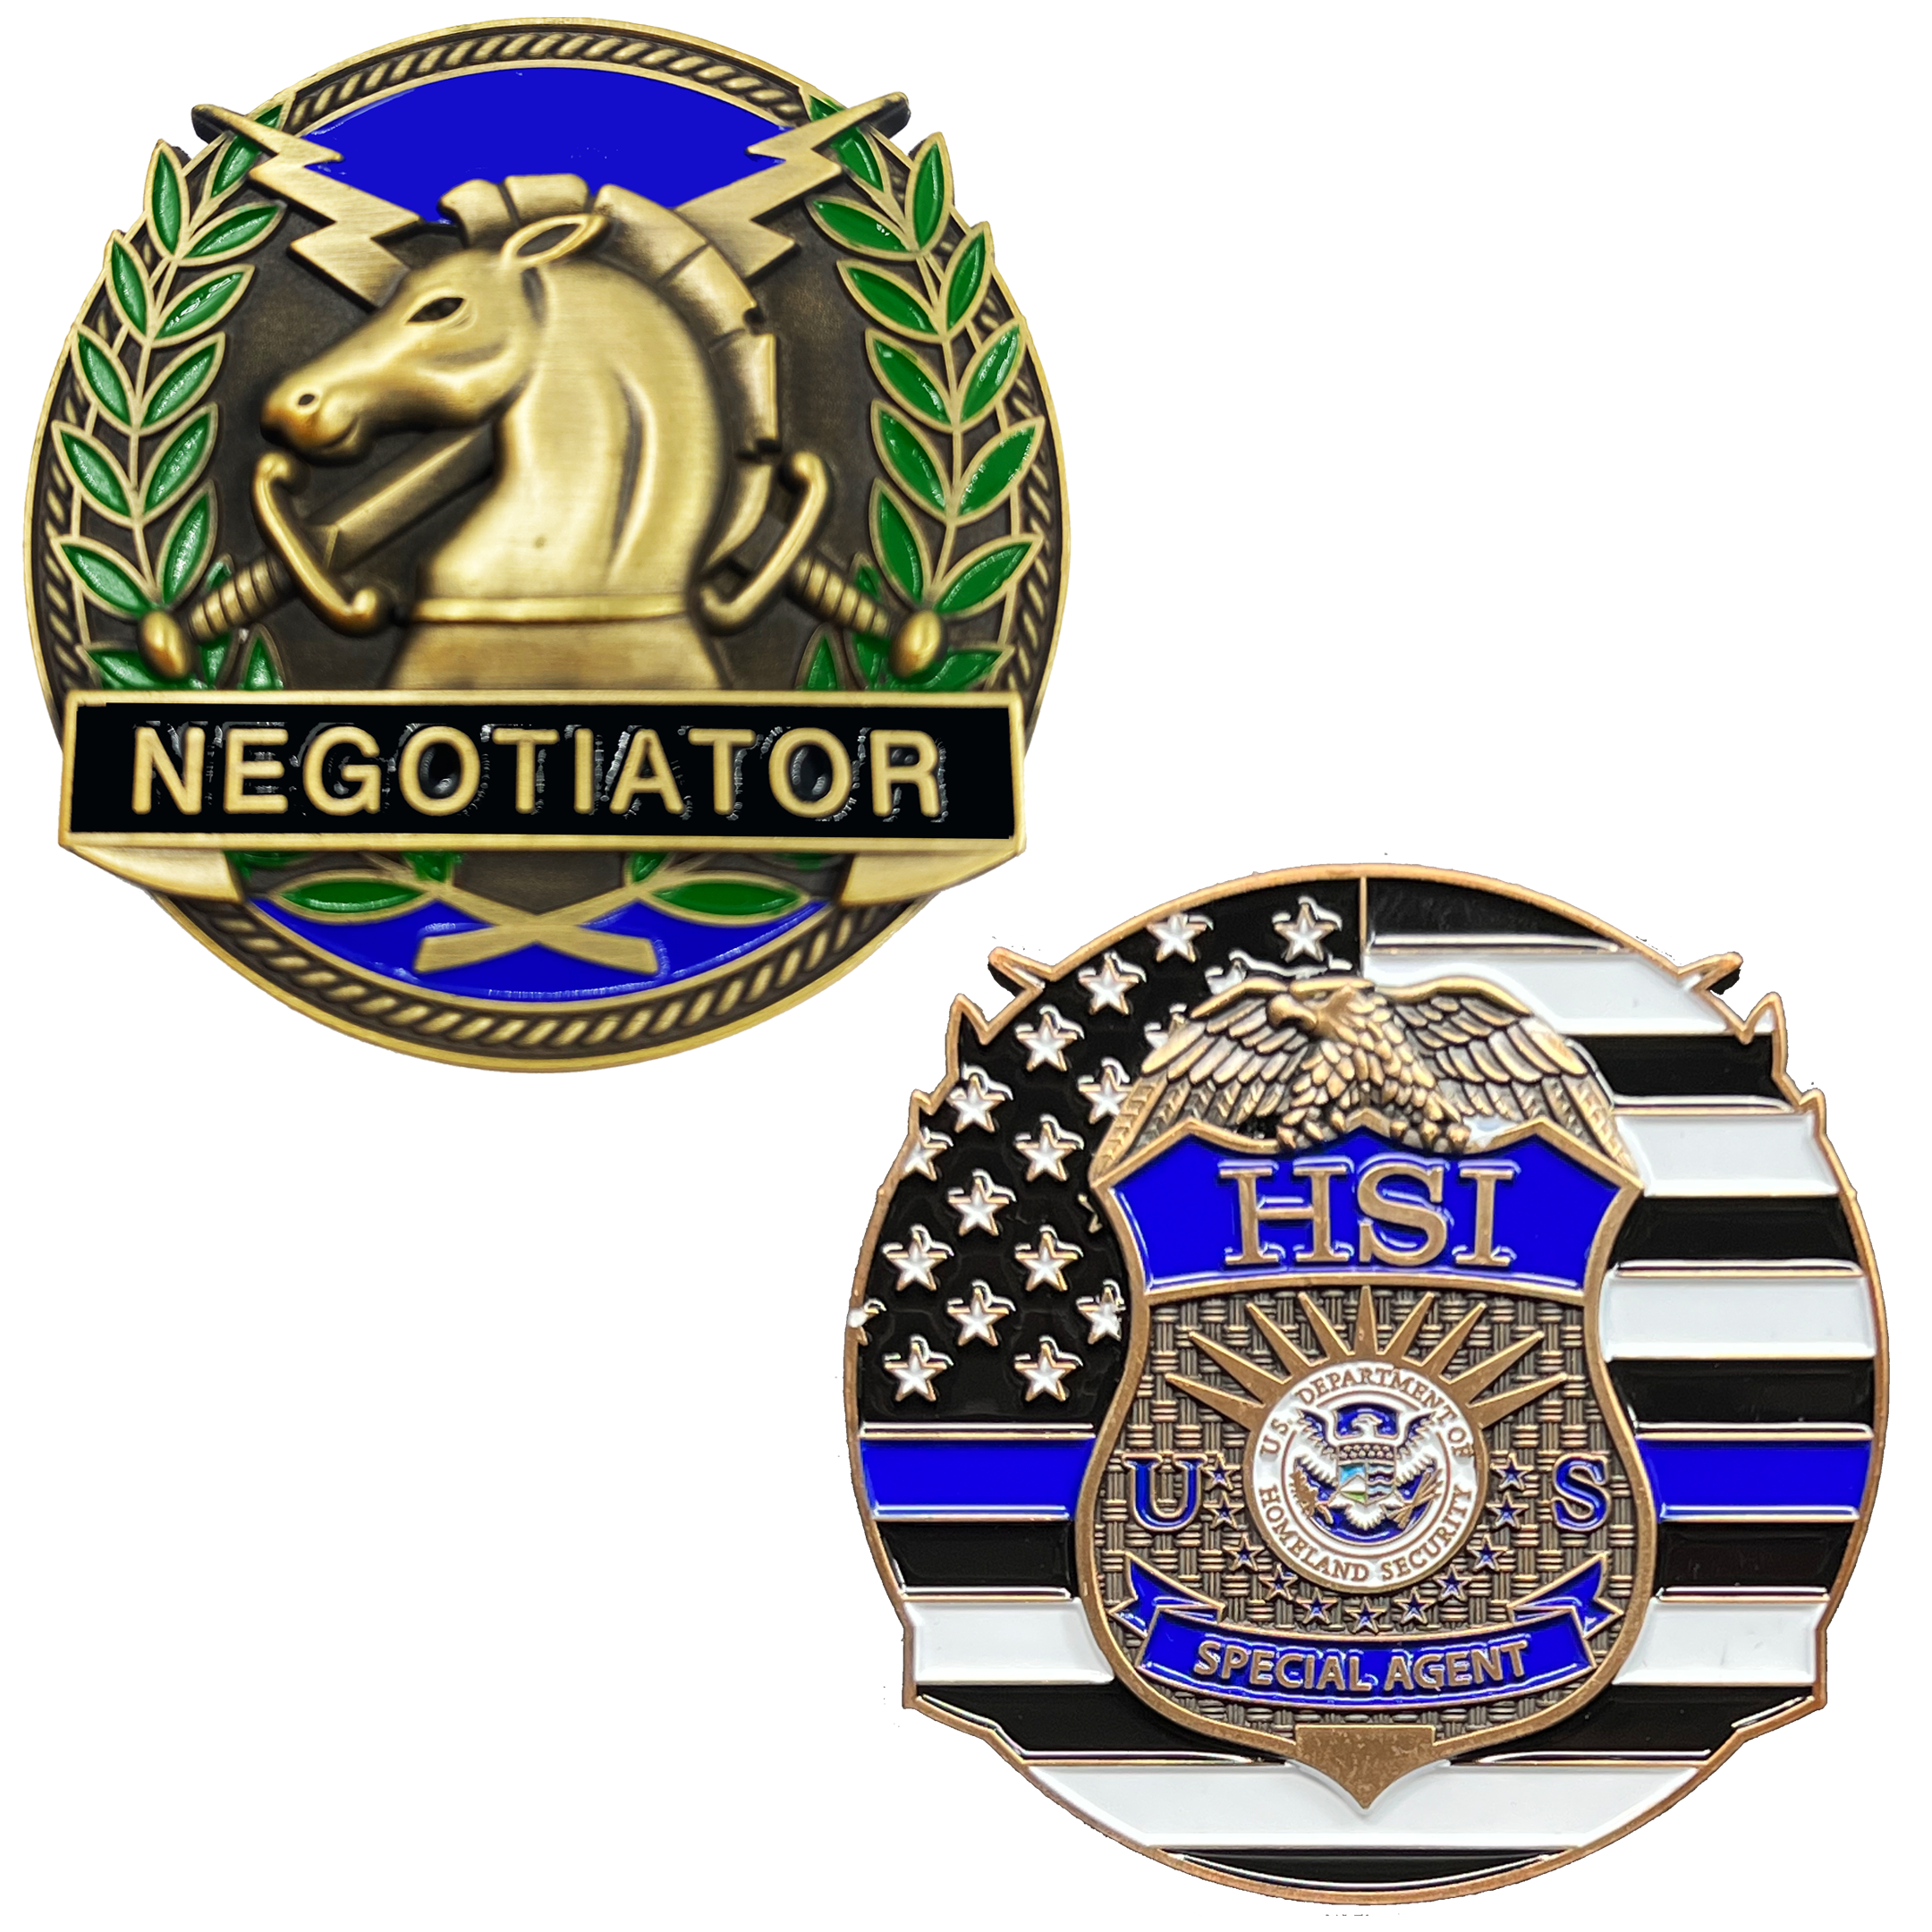 GL13-005 HSI Special Agent Thin Blue Line Negotiator Challenge Coin